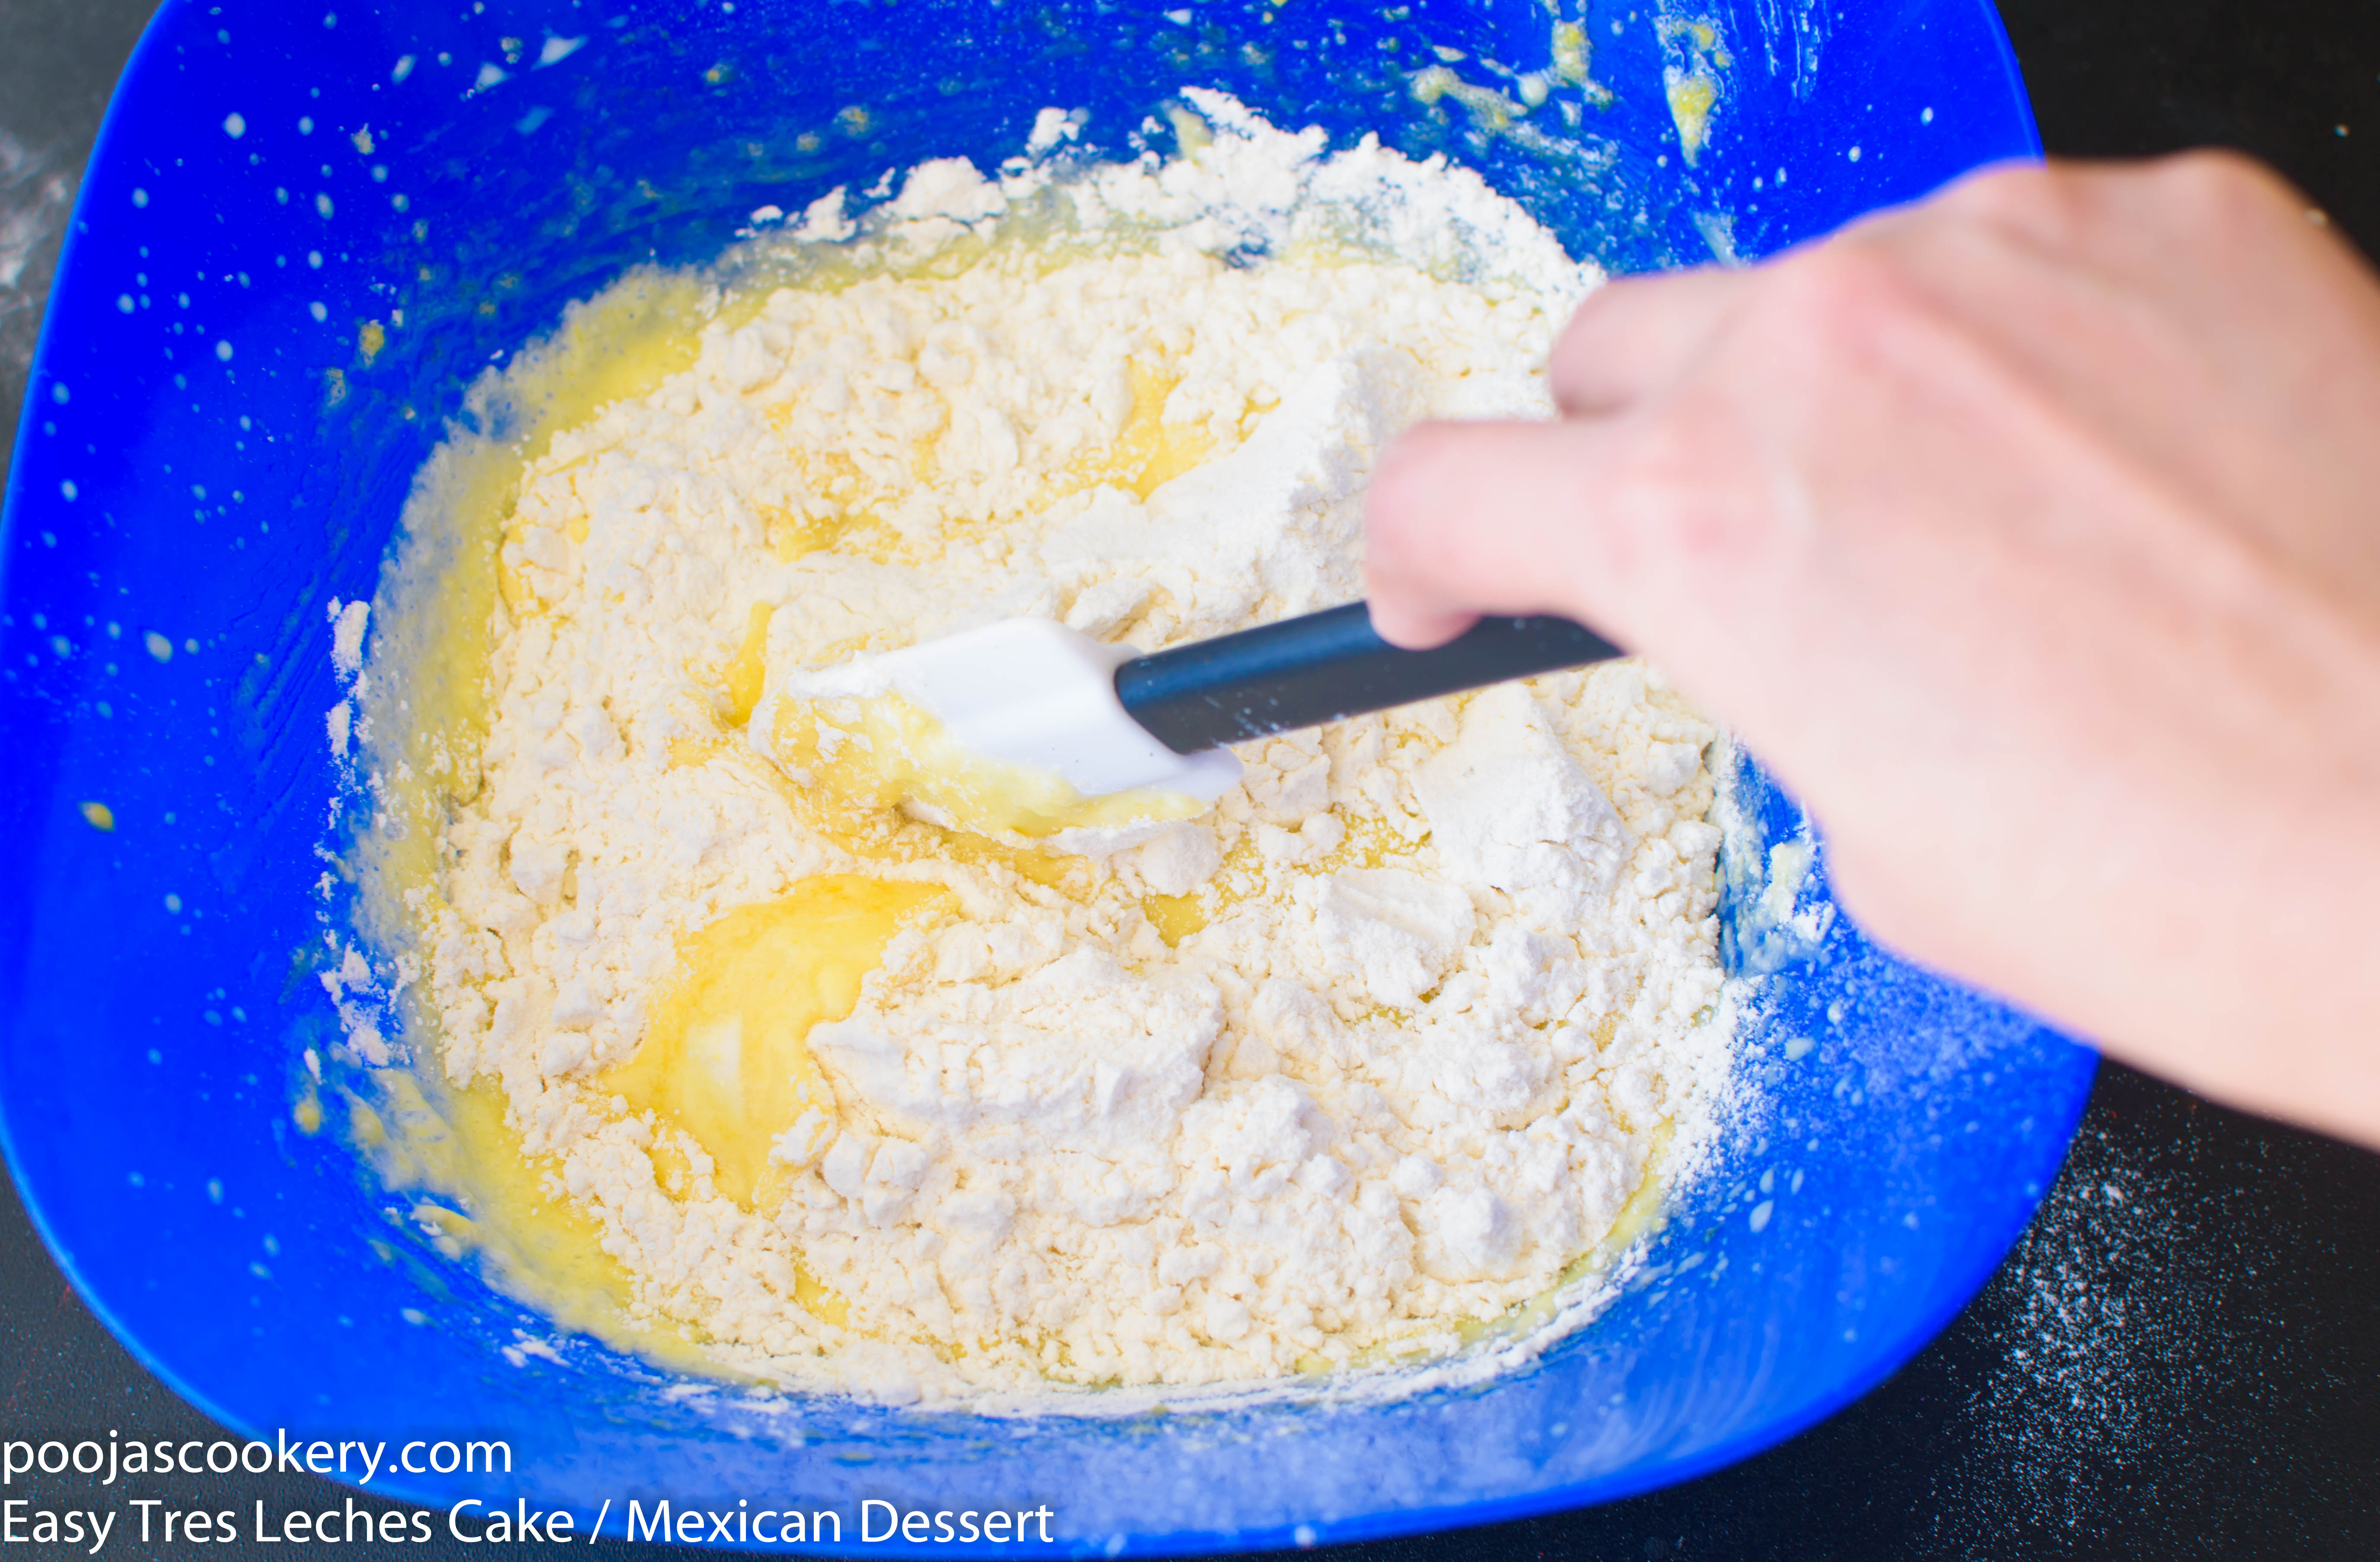 Sifted flour and baking powder into into beaten egg yolks